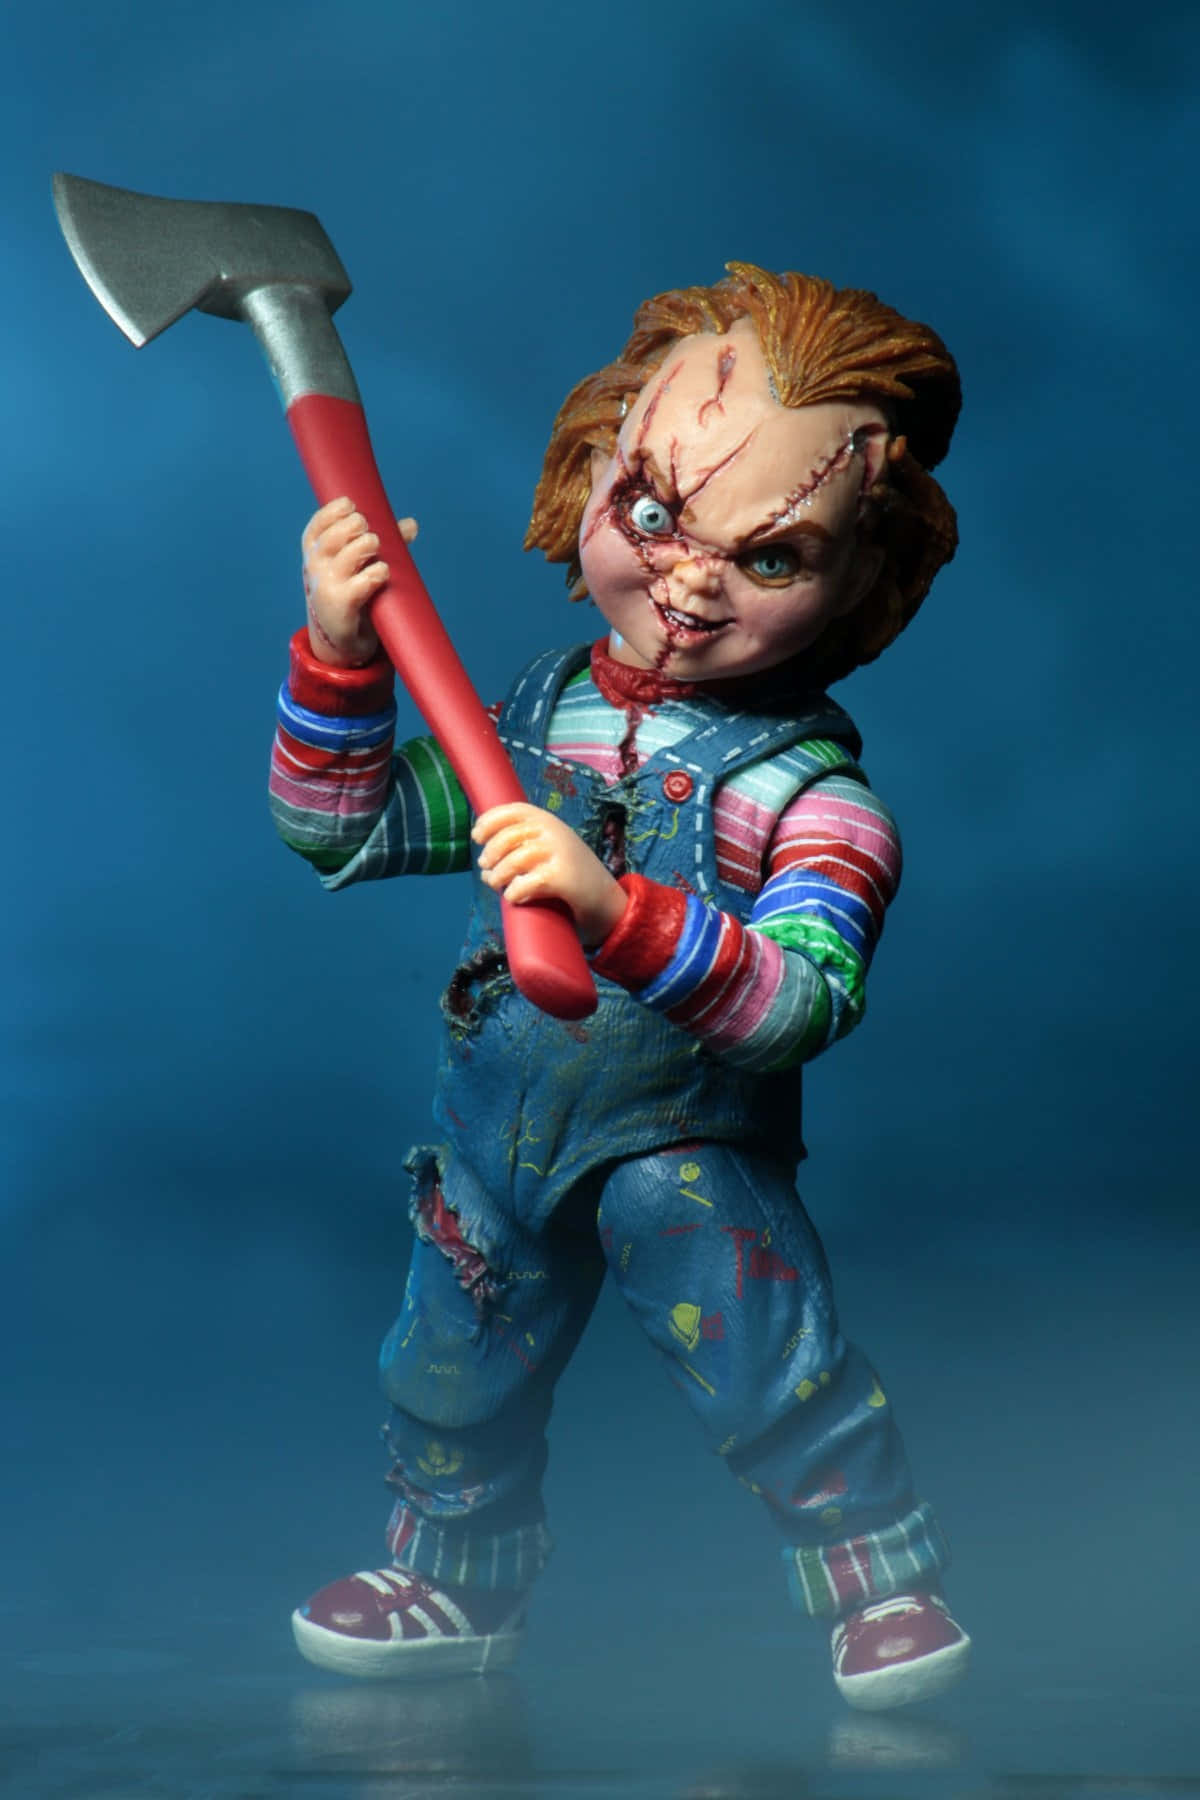 Chucky, the iconic slasher character